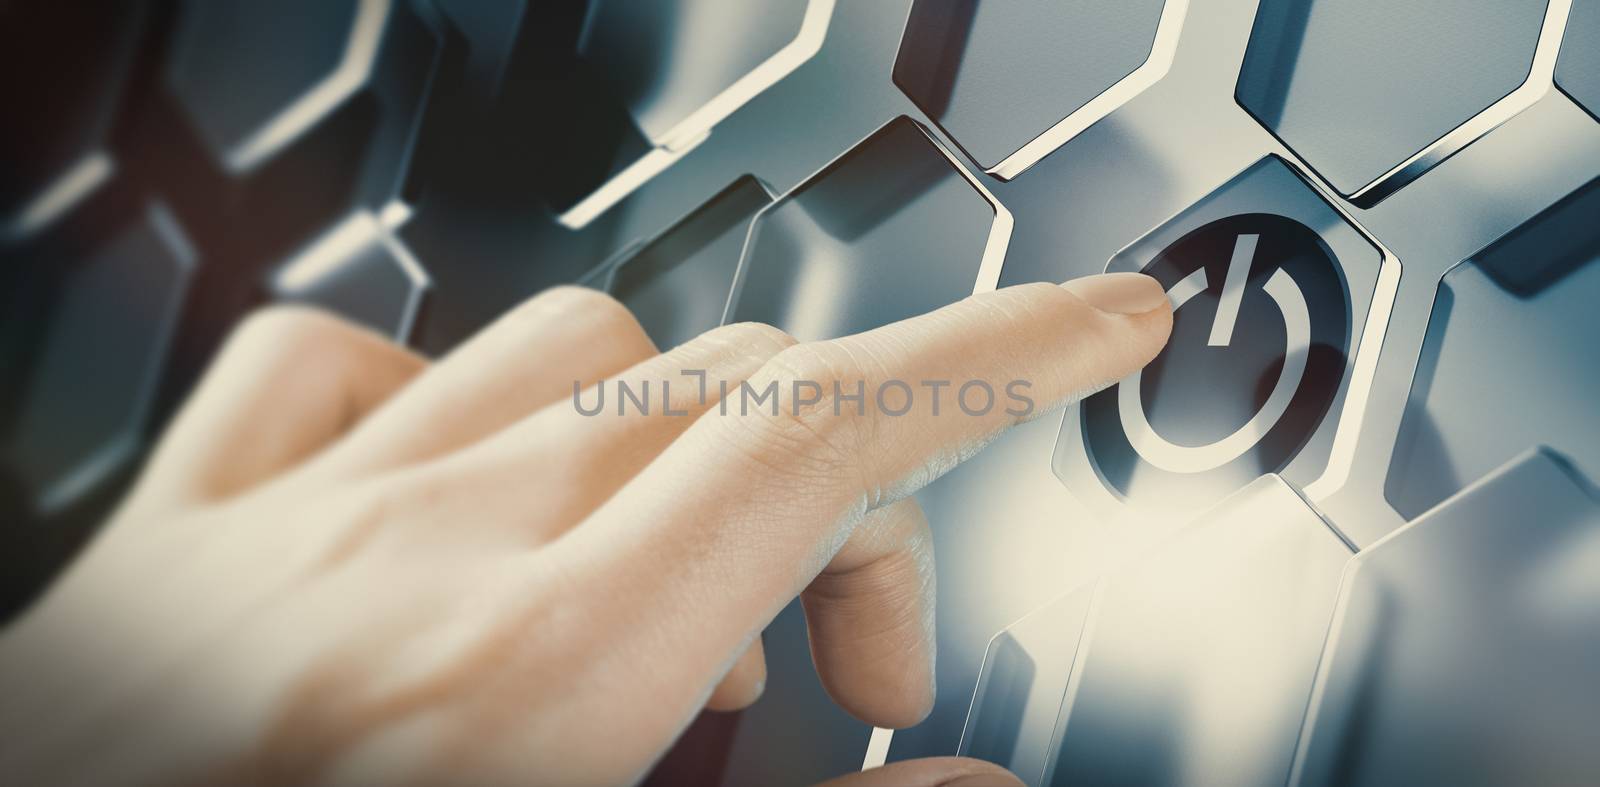 Finger pushing digital start button on a futuristic interface. Conceptual design of an innovative technology. Composite image between a hand photography and a 3D background.